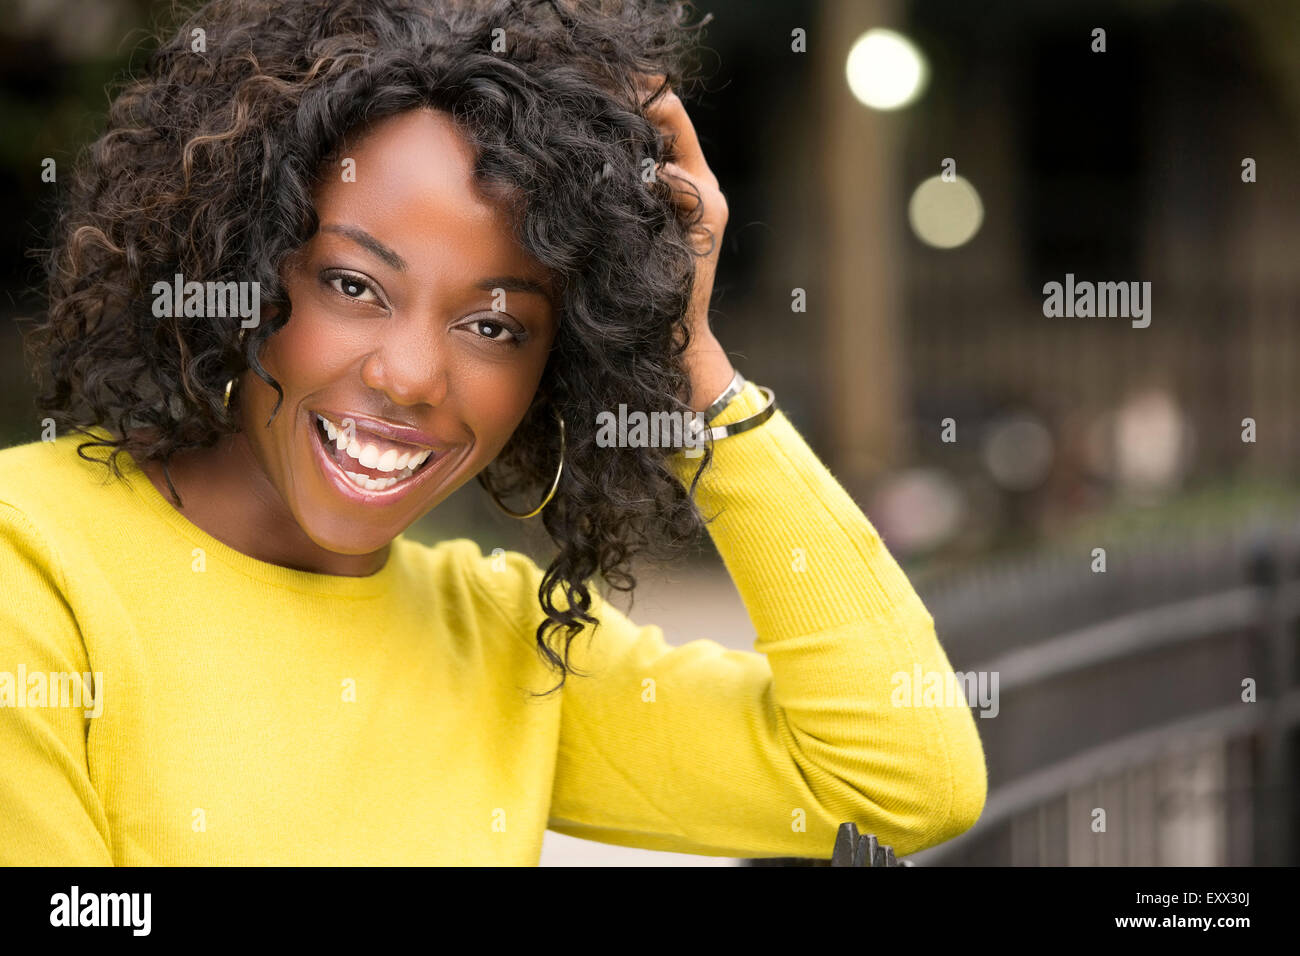 Smiling woman with hand in hair Banque D'Images